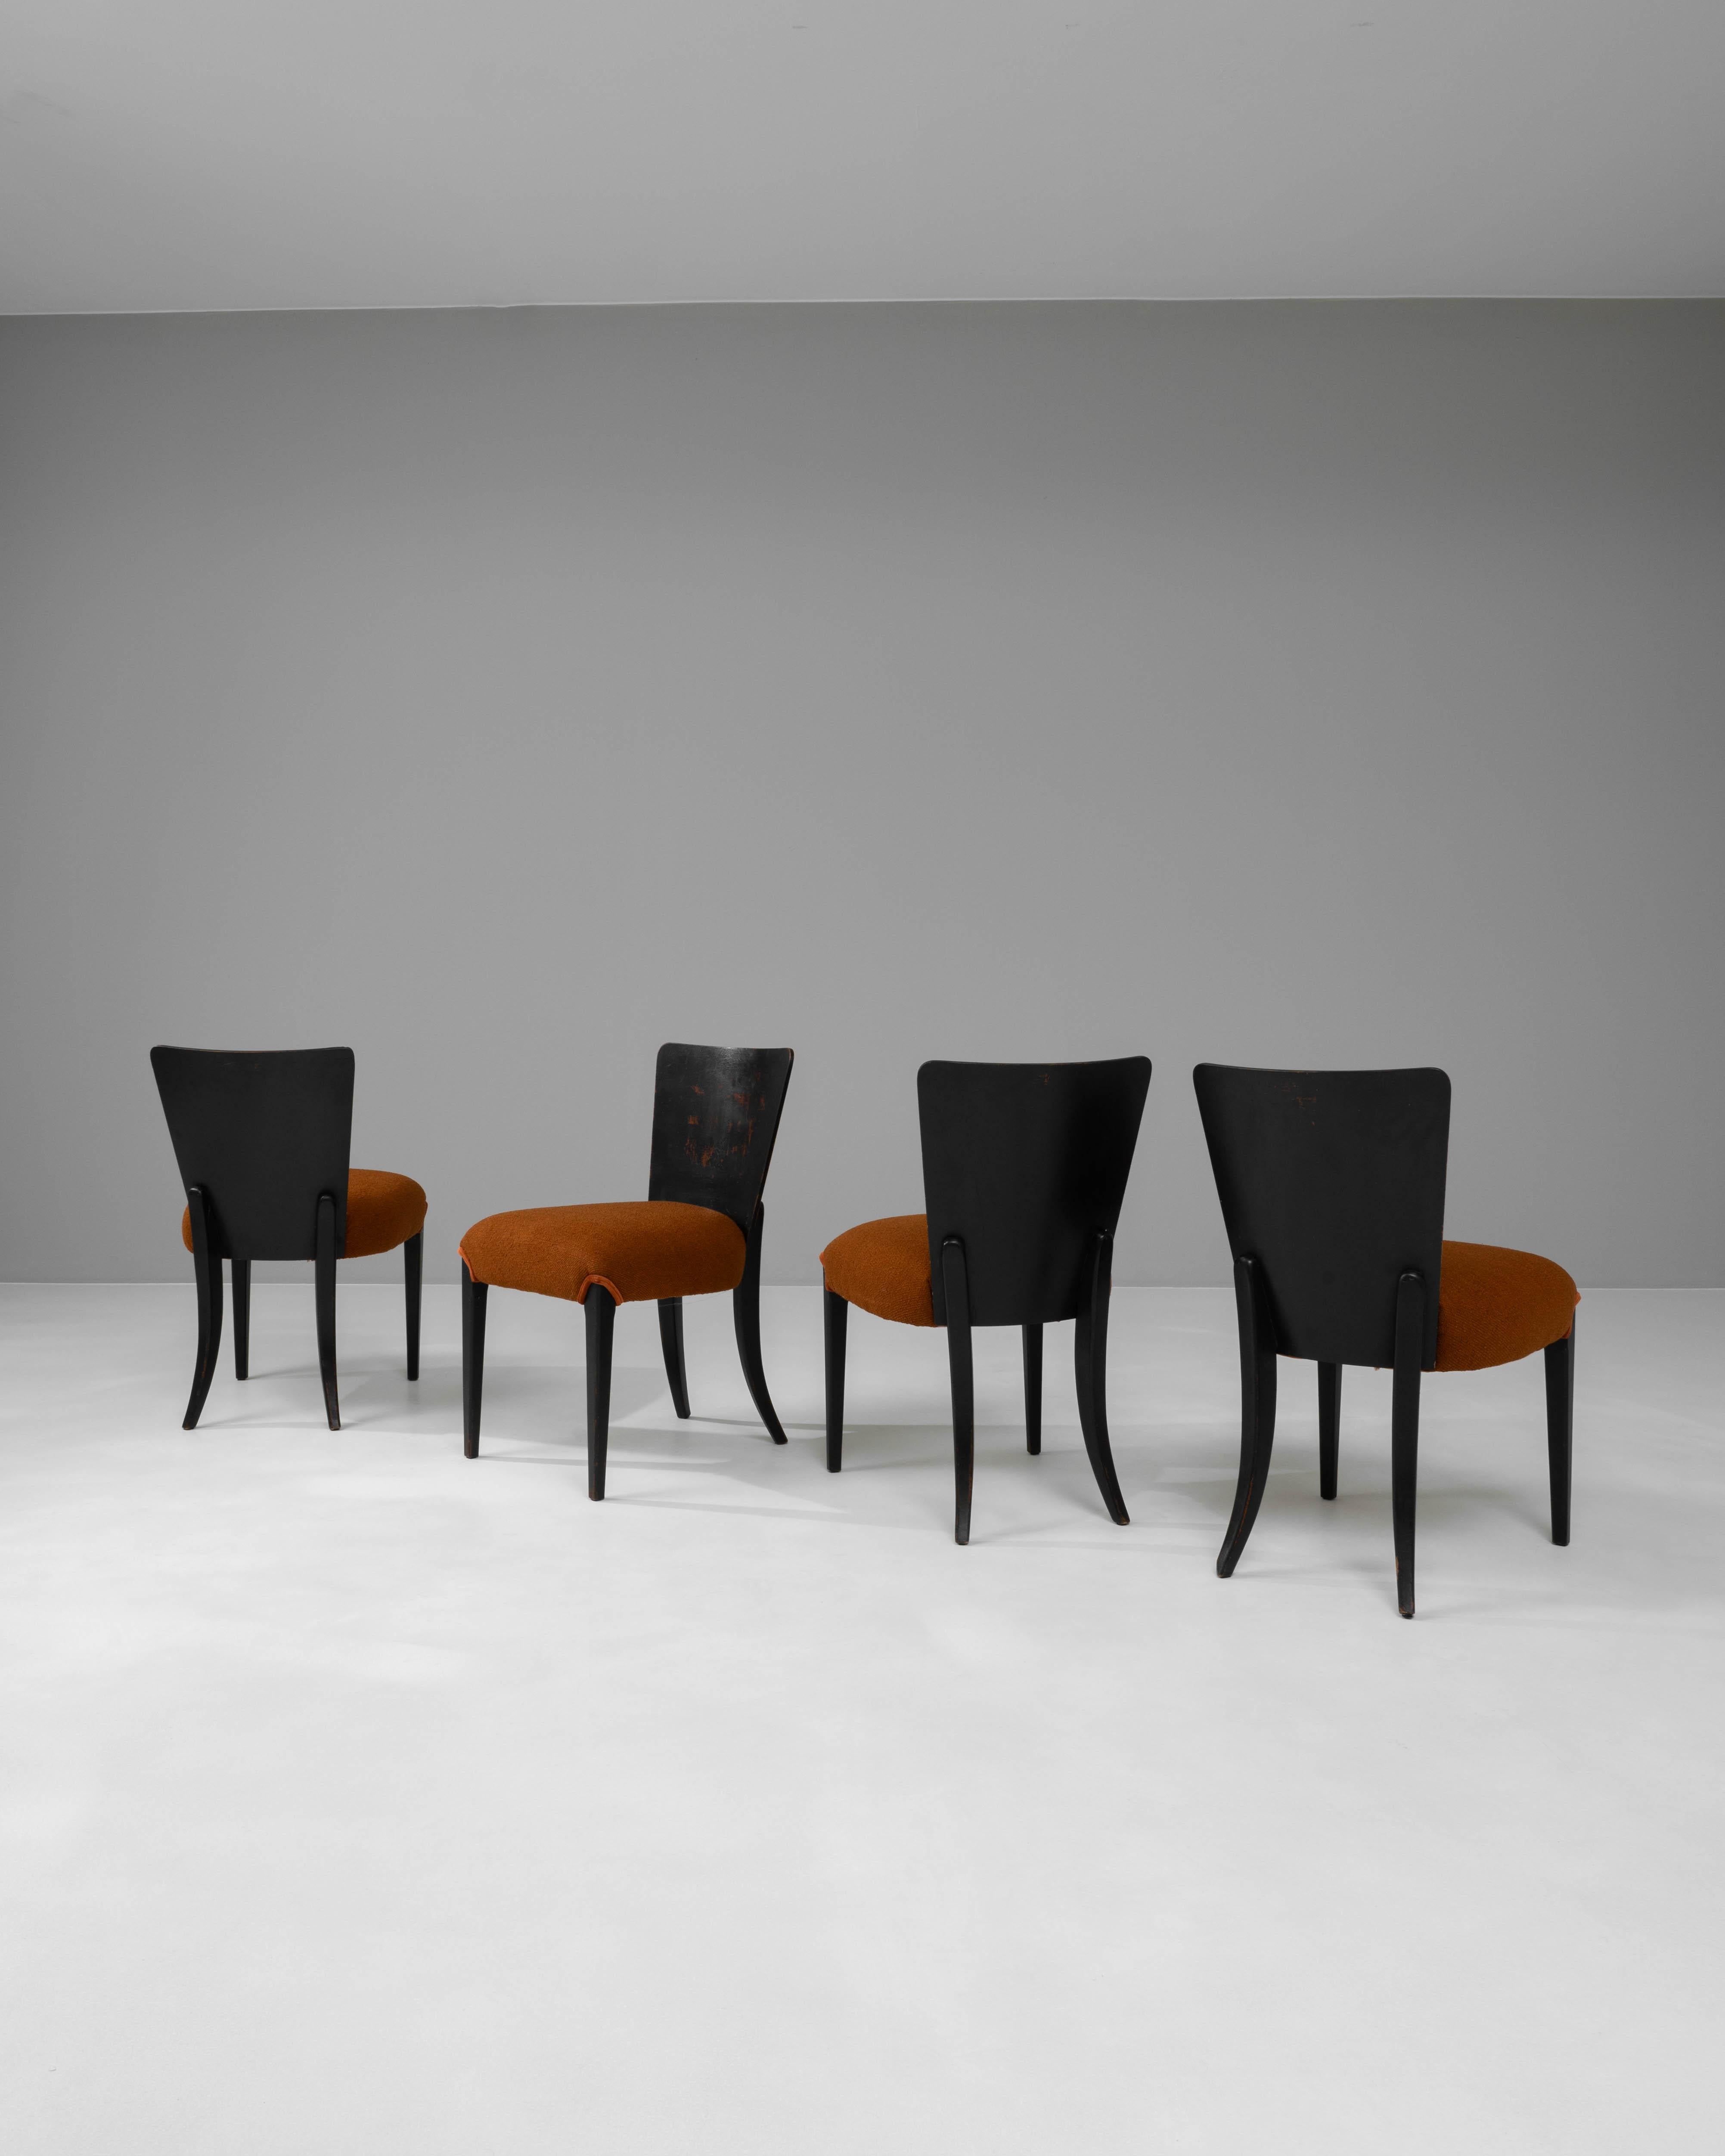 20th Century Czech Wooden Dining Chairs With Upholstered Seats By J. Halabala 4